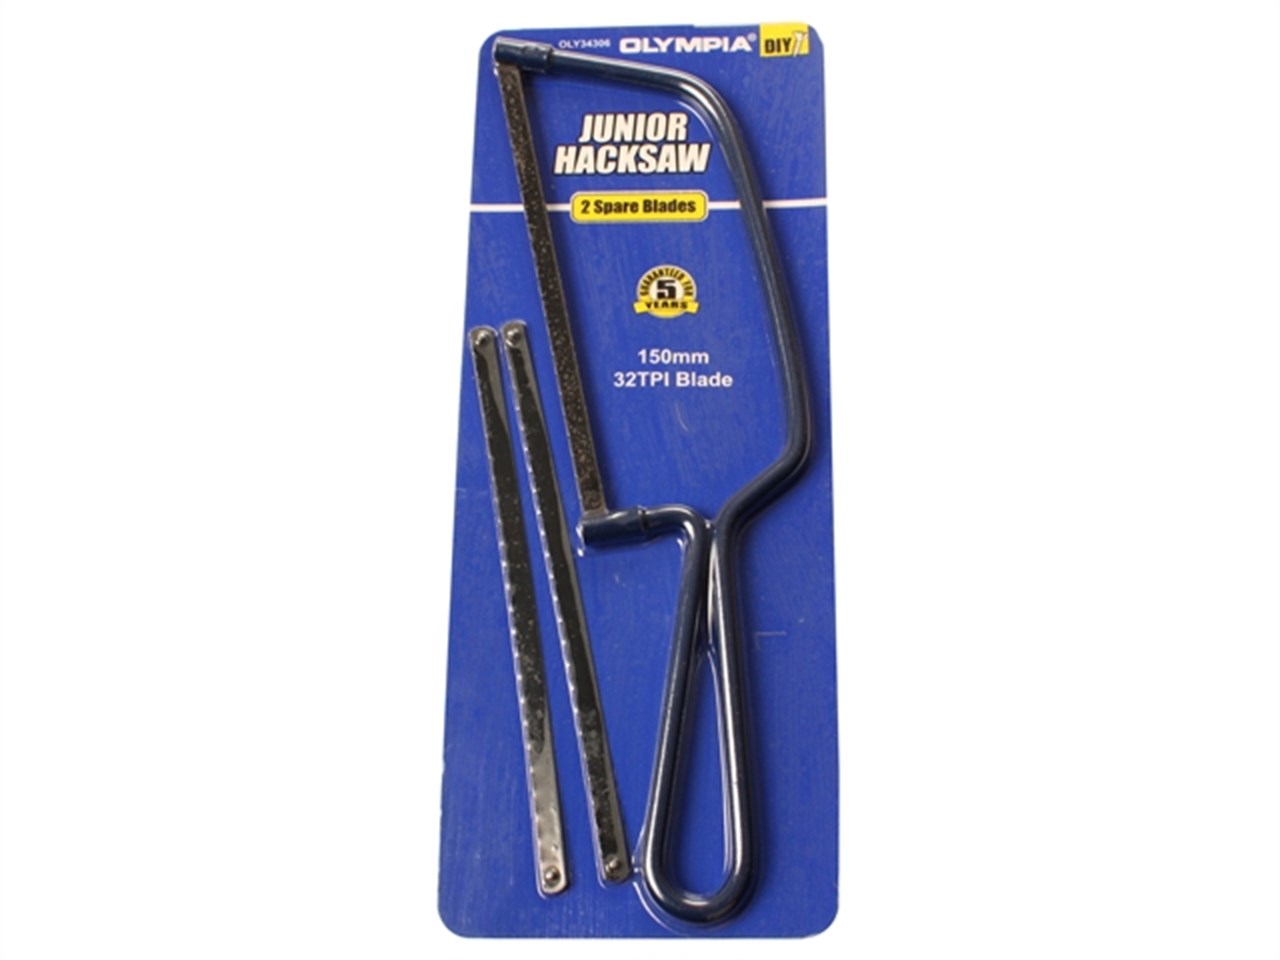 OLYMPIA Junior Hacksaw with blades 150mm